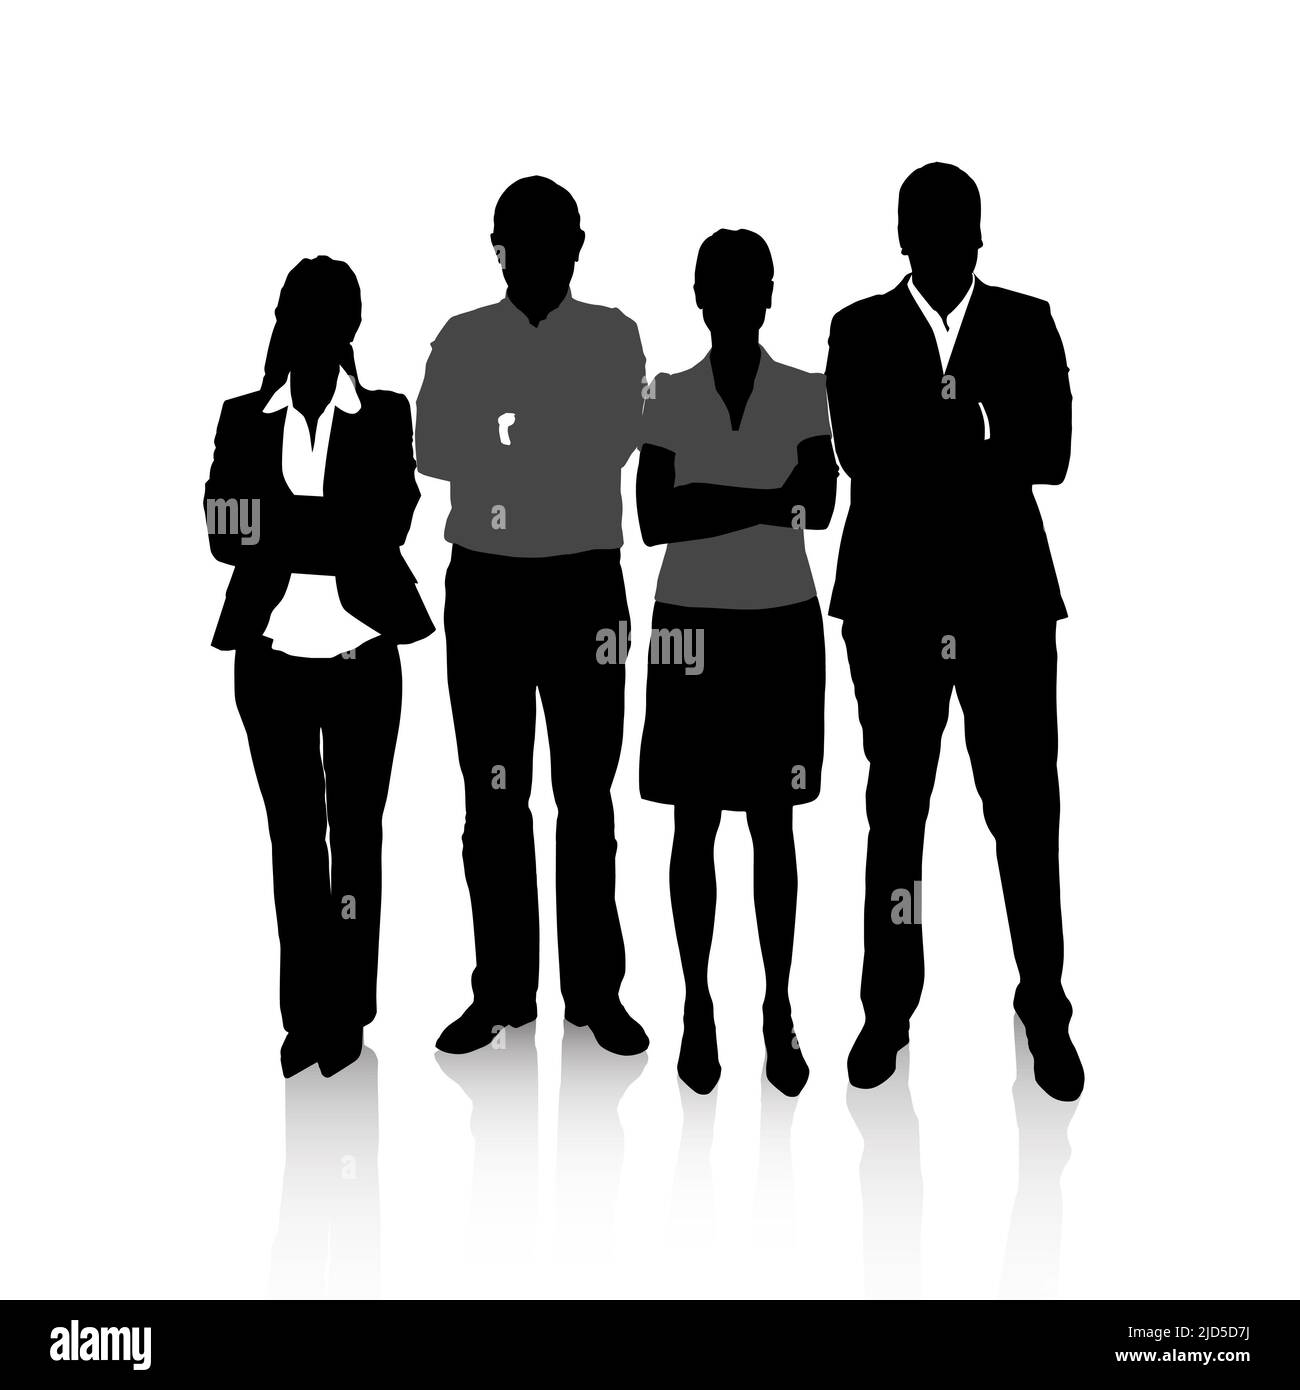 The silhouette of successful business. Business people at work. Stock Photo